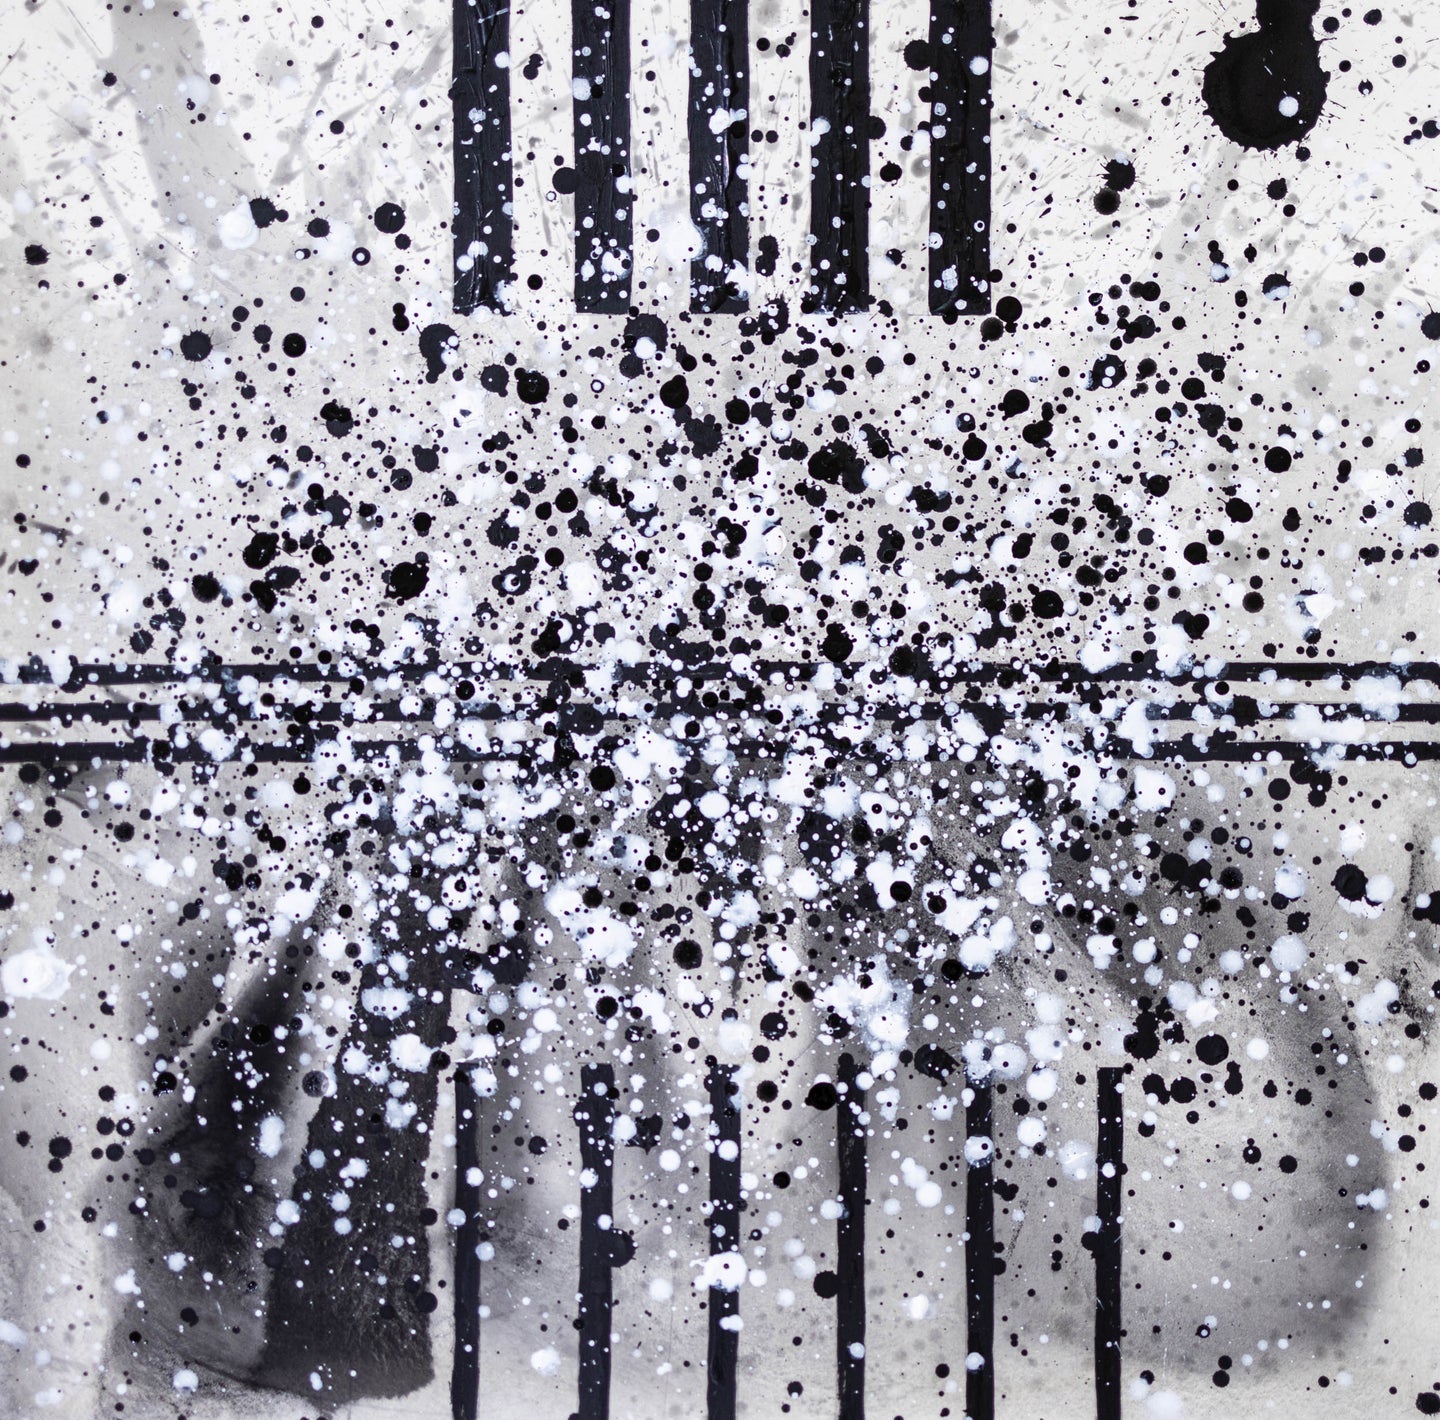 J. Steven Manolis, South Pointe Park (Black & White) 3, 2021, watercolor, acrylic and latex enamel on paper, 18 x 18 inches, black and white abstract art